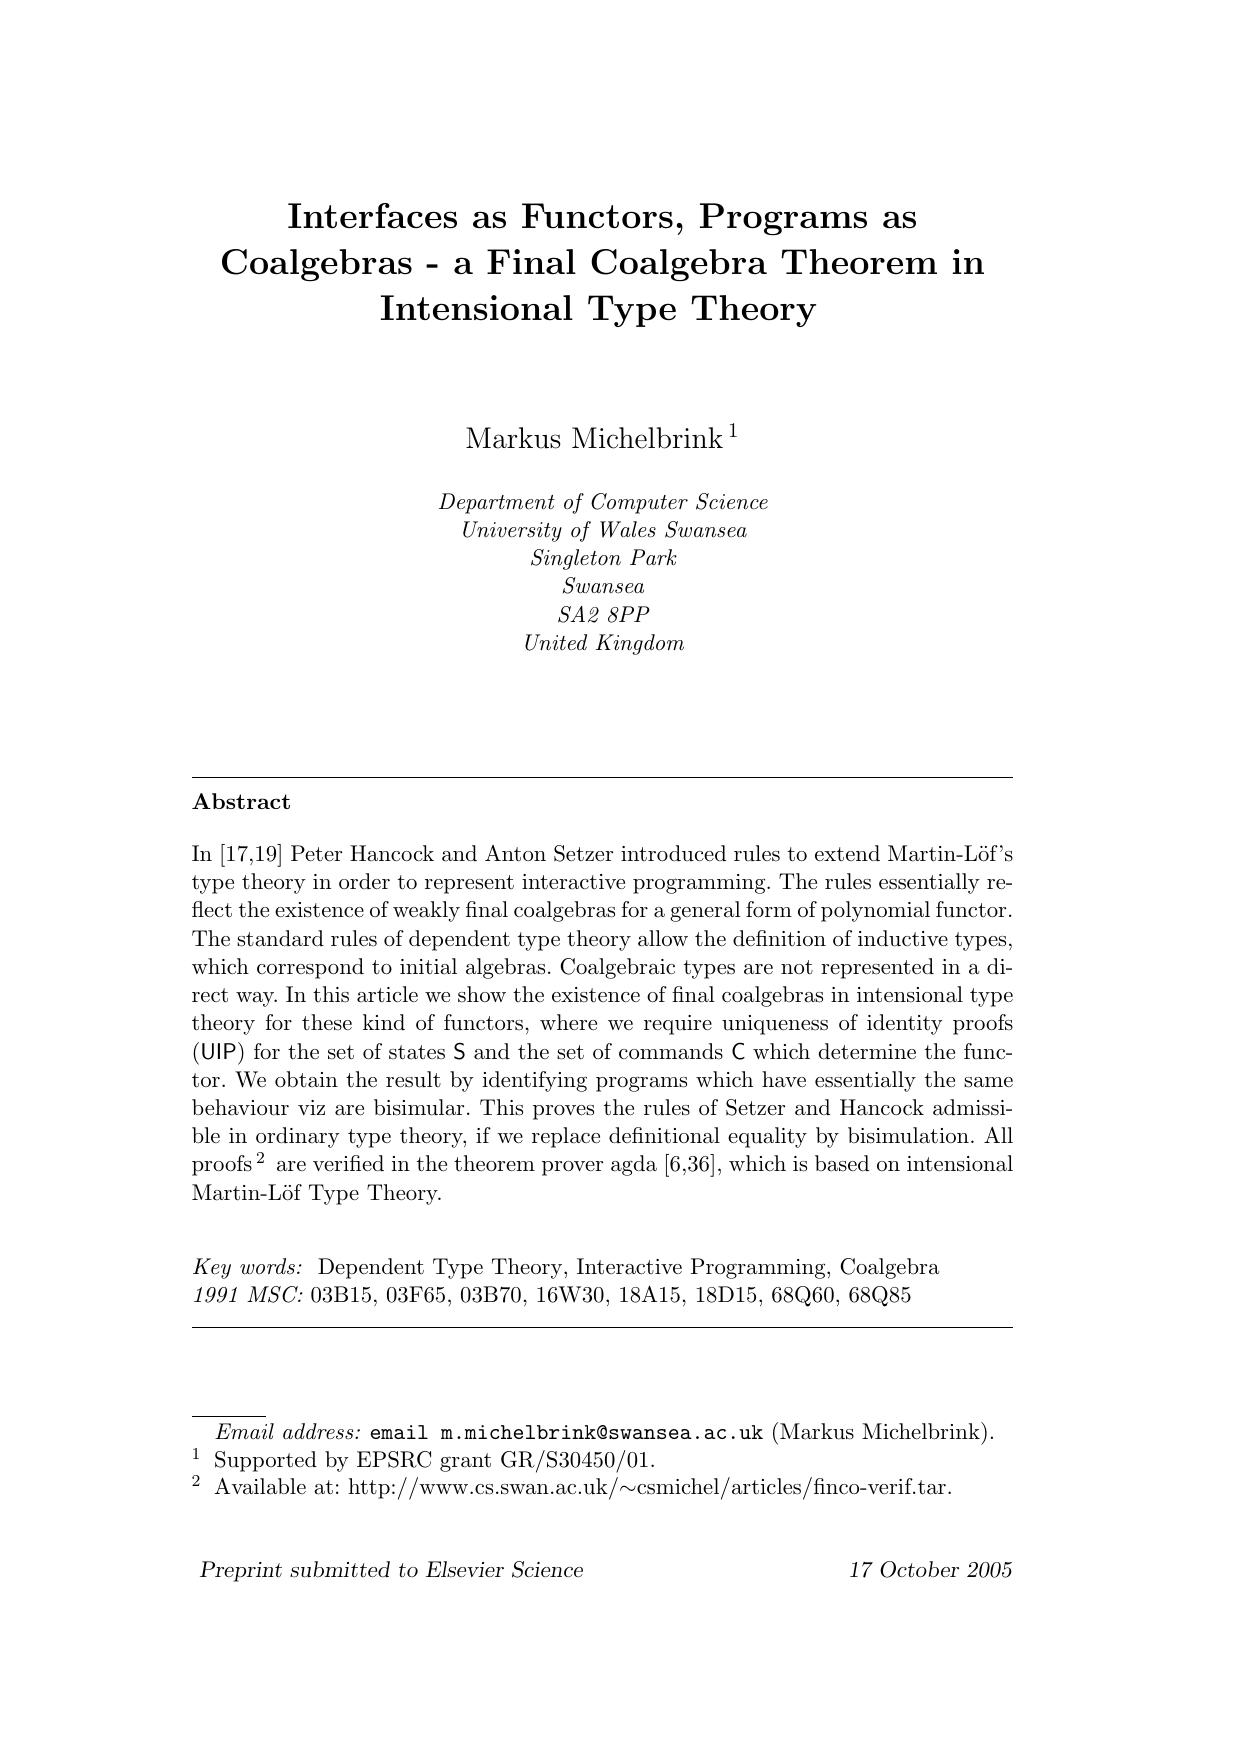 Interfaces as Functors, Programs as Coalgebras - a Final Coalgebra Theorem in Intensional Type Theory - Paper